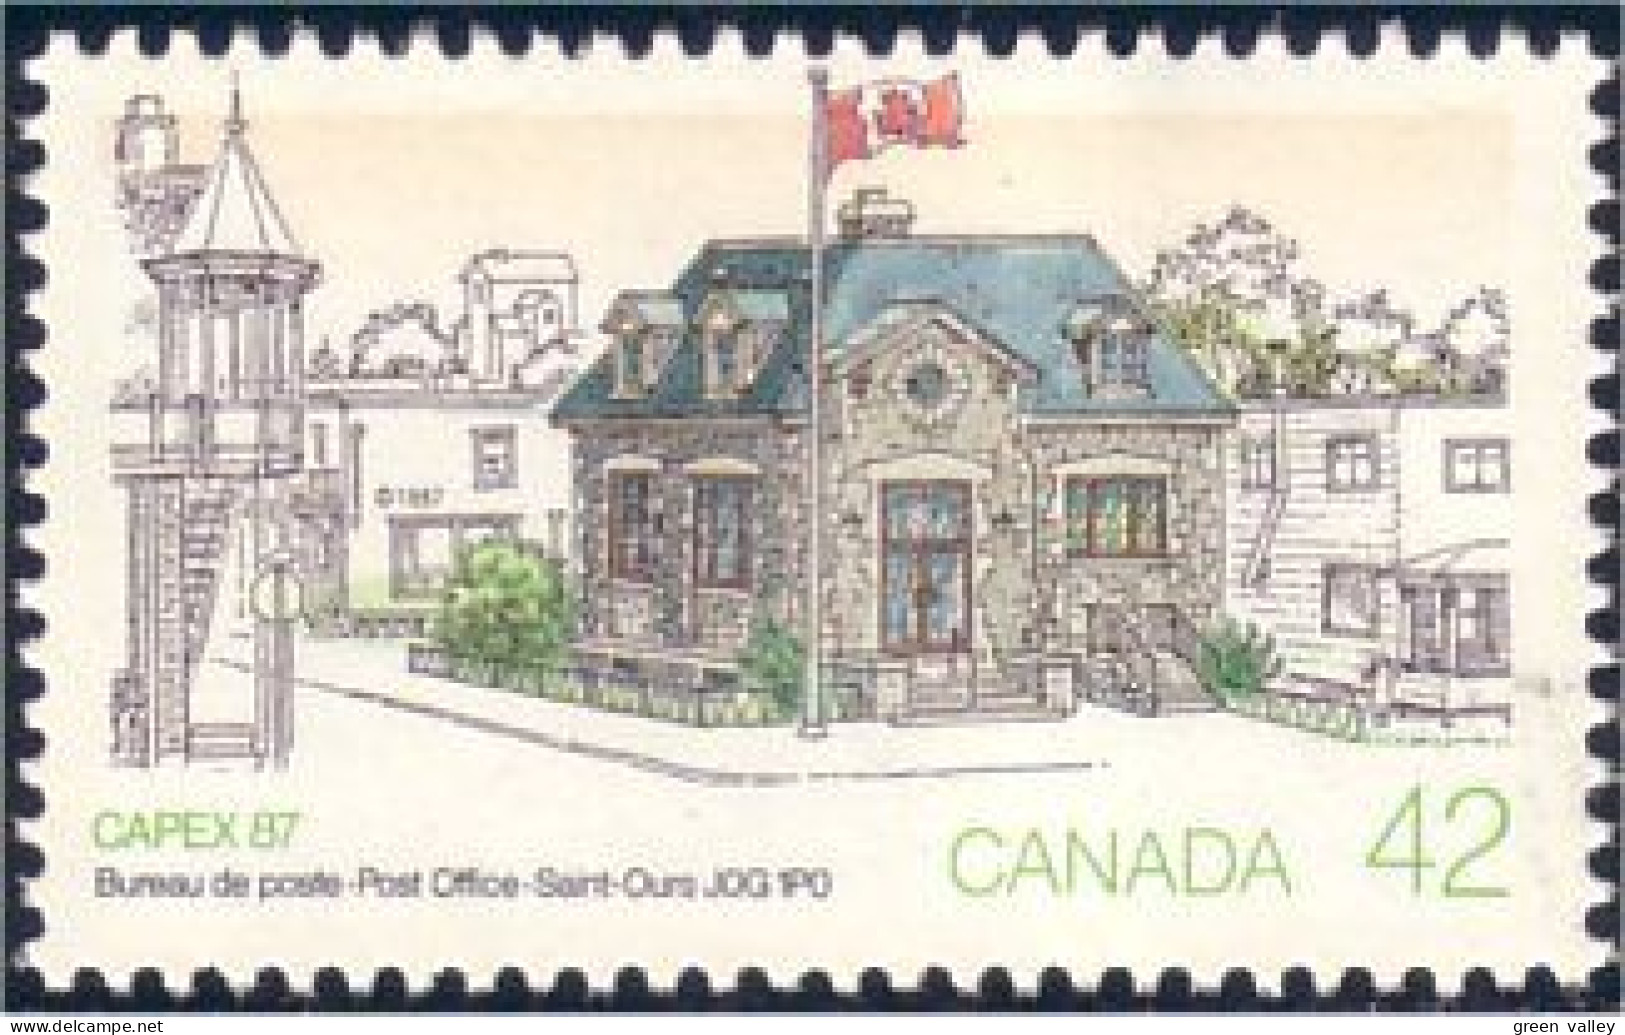 Canada Saint-Ours Post Office Capex 87 MNH ** Neuf SC (C11-25Ada) - Neufs